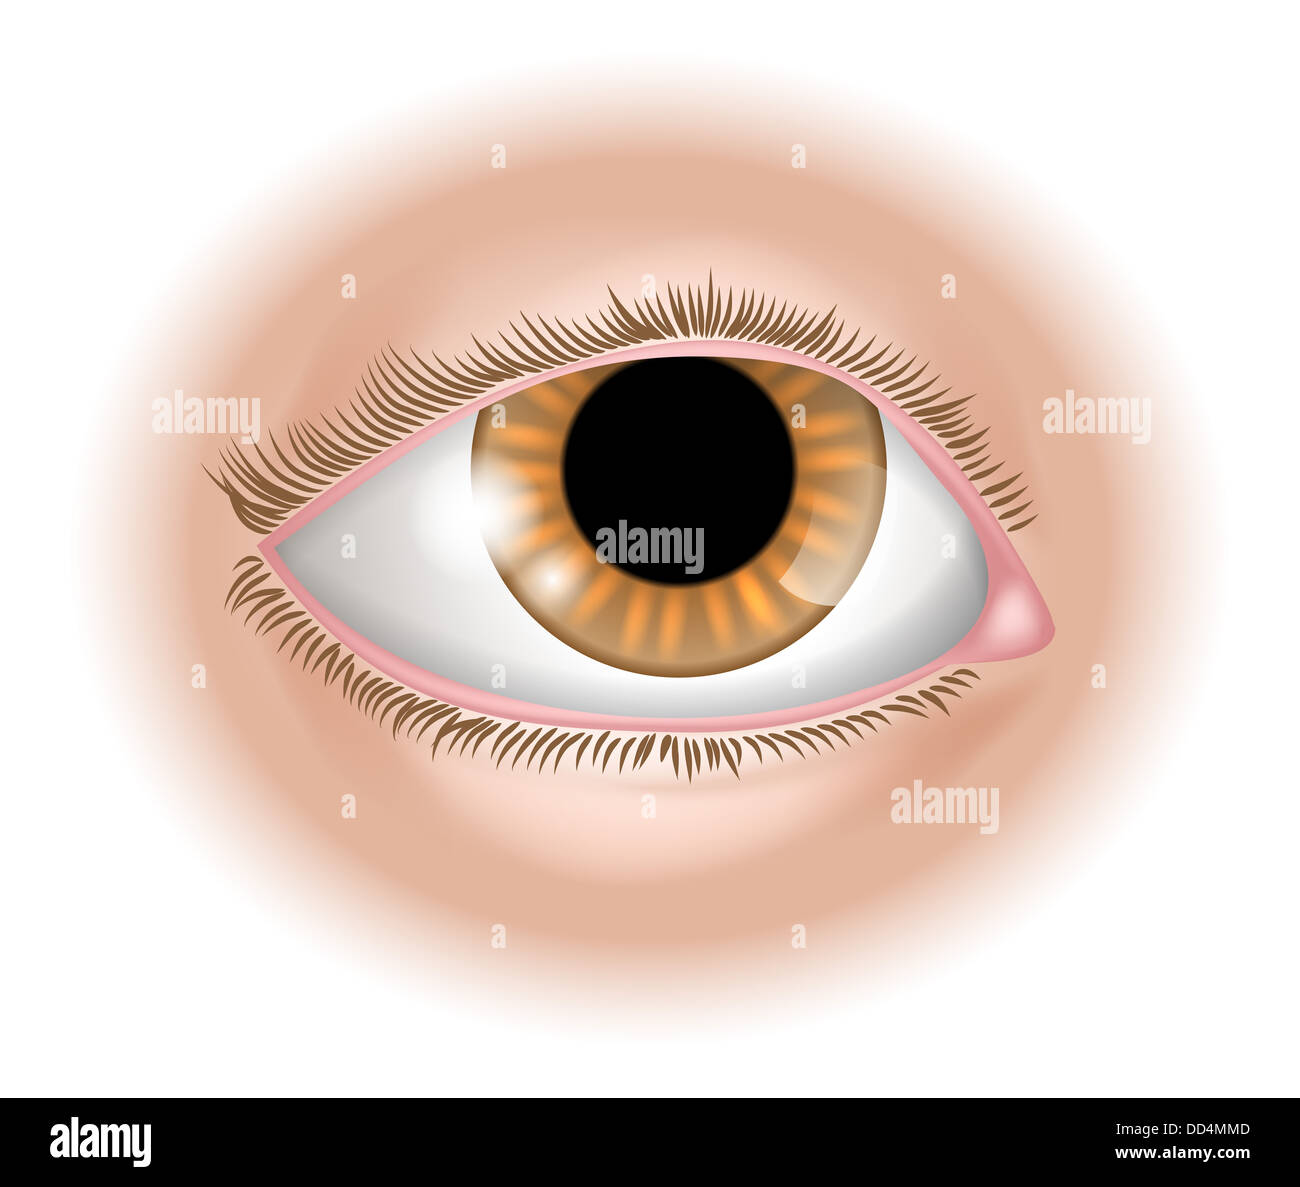 An illustration of a human eye body part, could represent sight in the five senses Stock Photo